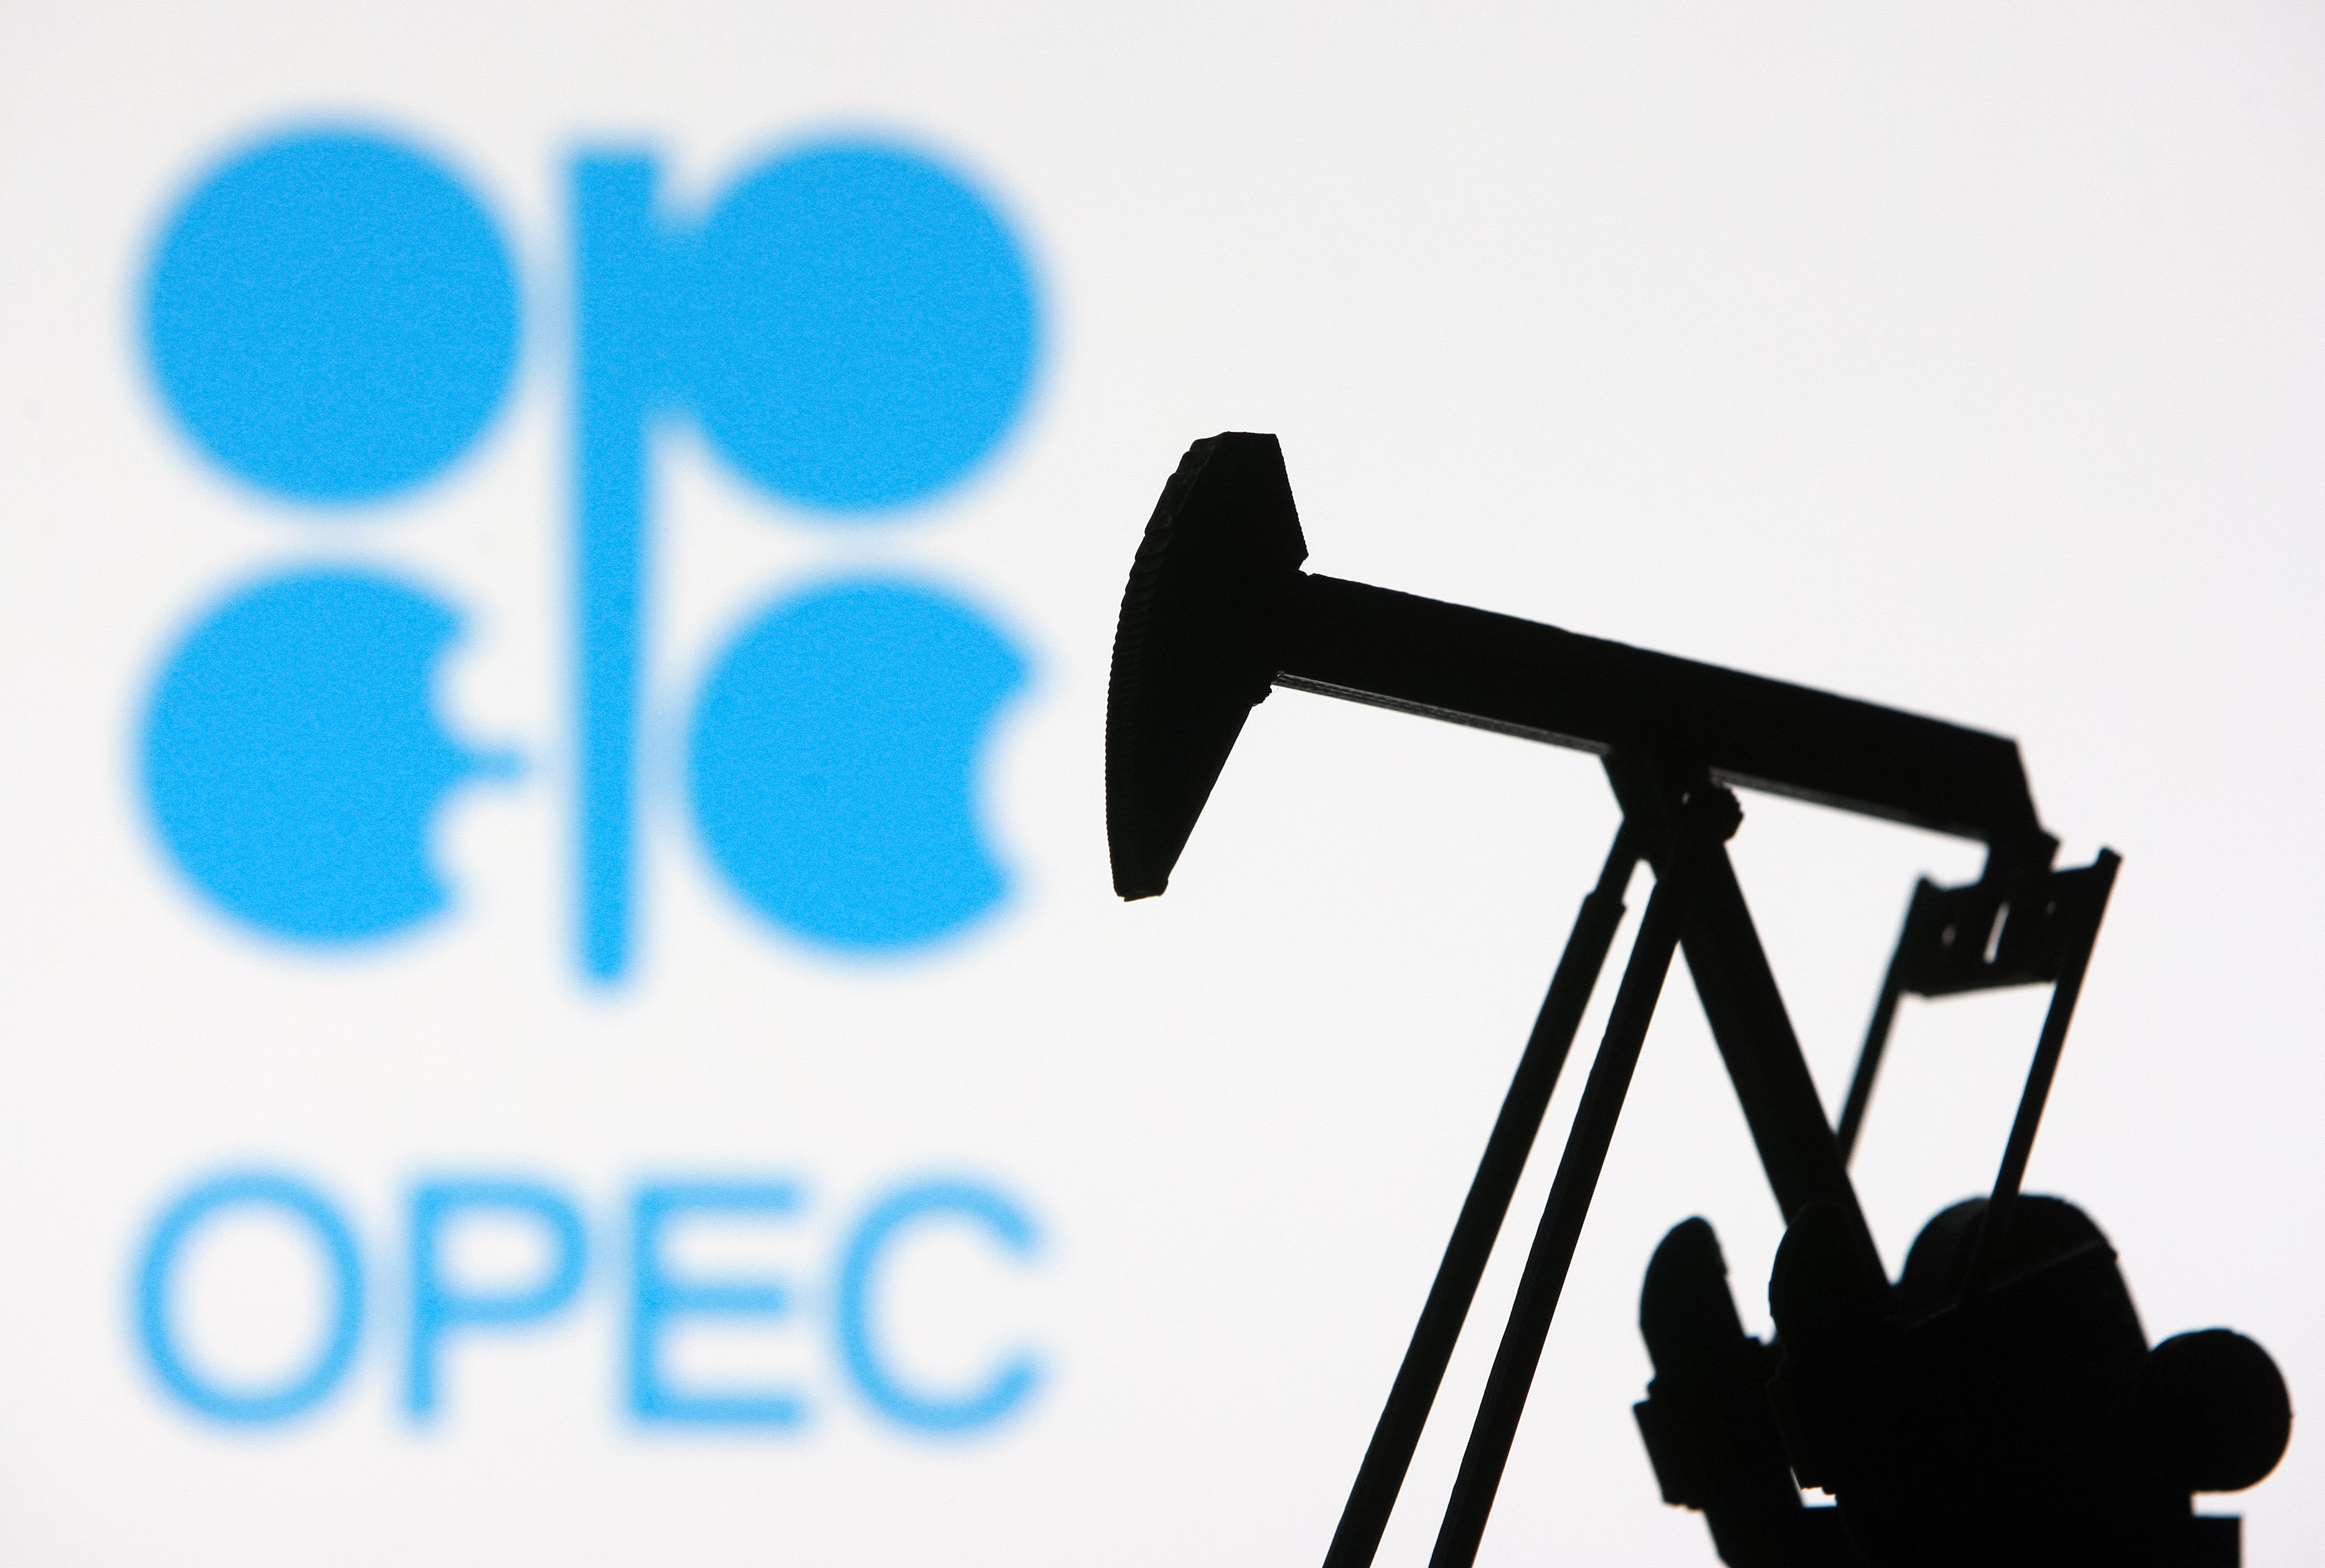 Oil prices see surge as OPEC+ prepares for pivotal meeting on production cuts